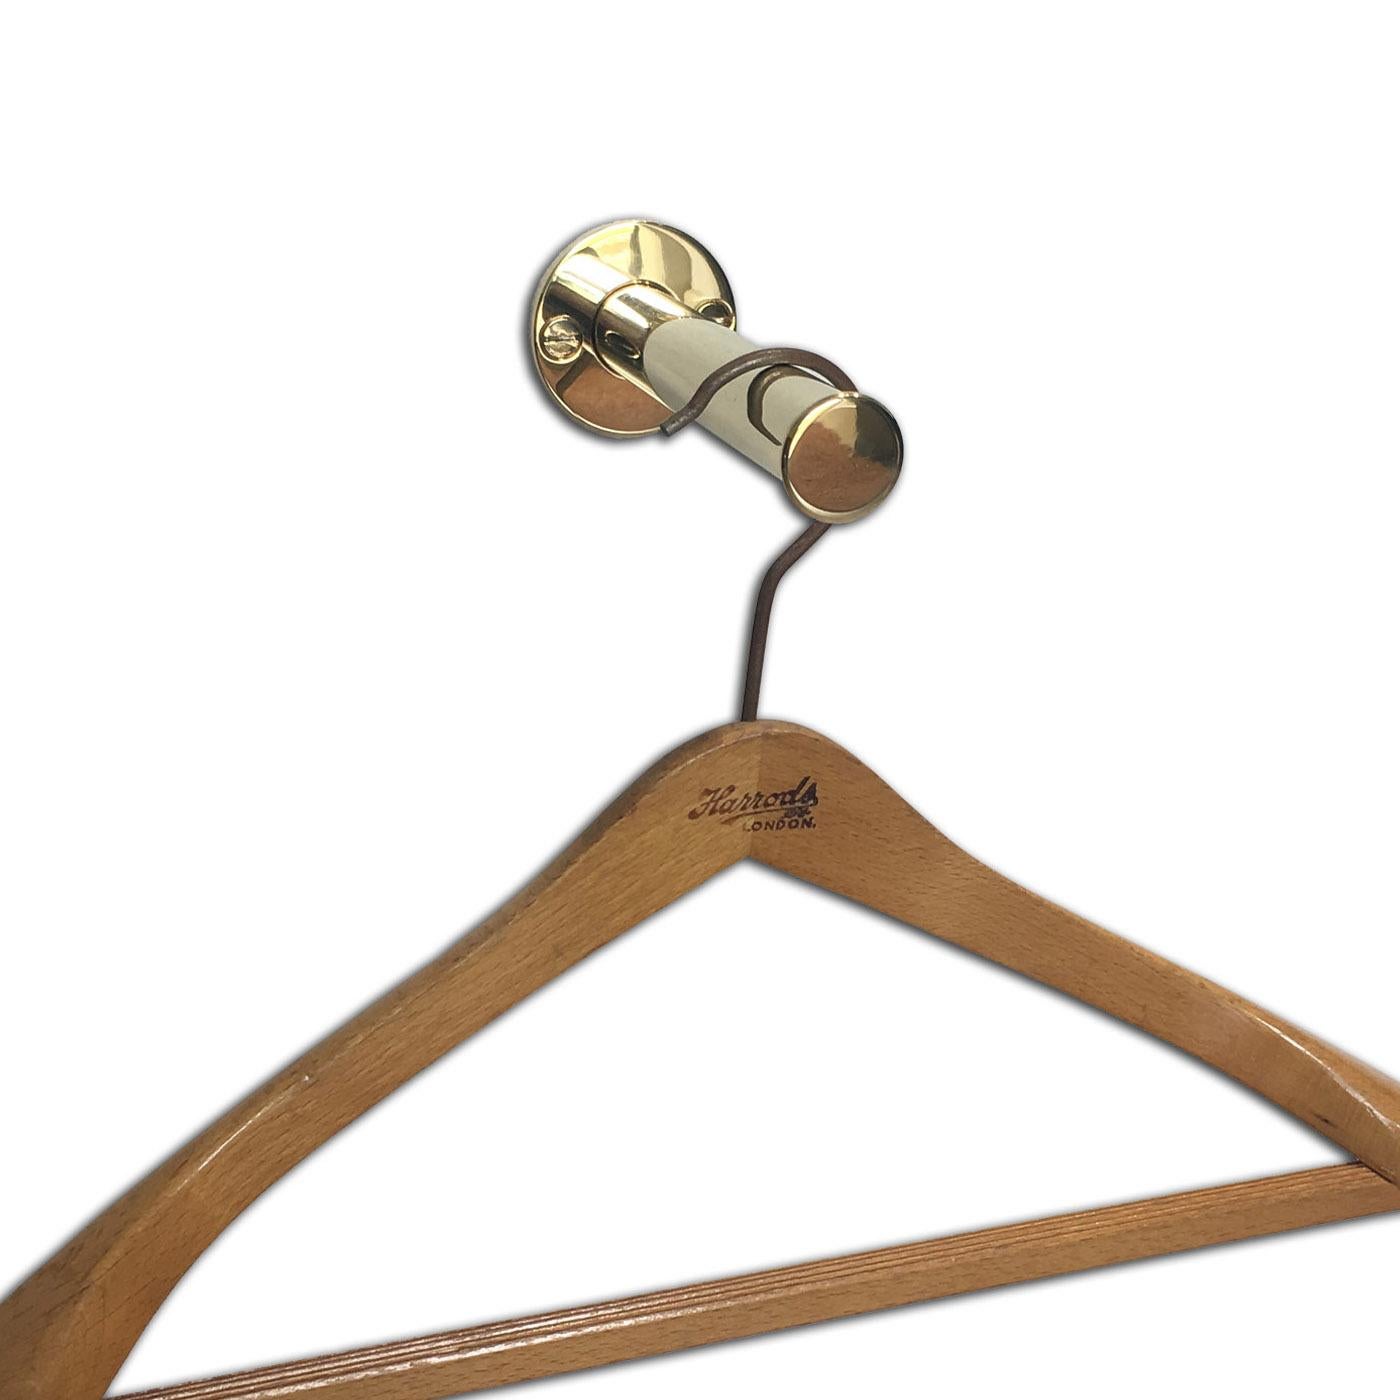 An Andrew Nebbett Designs retactable wall mounted valet hook (ideal for dressing rooms etc.) in polished brass.
The valet hook back plate is 4 cm diameter and the hook extends 15 cm out from the wall.
This valet hook is made to order and is